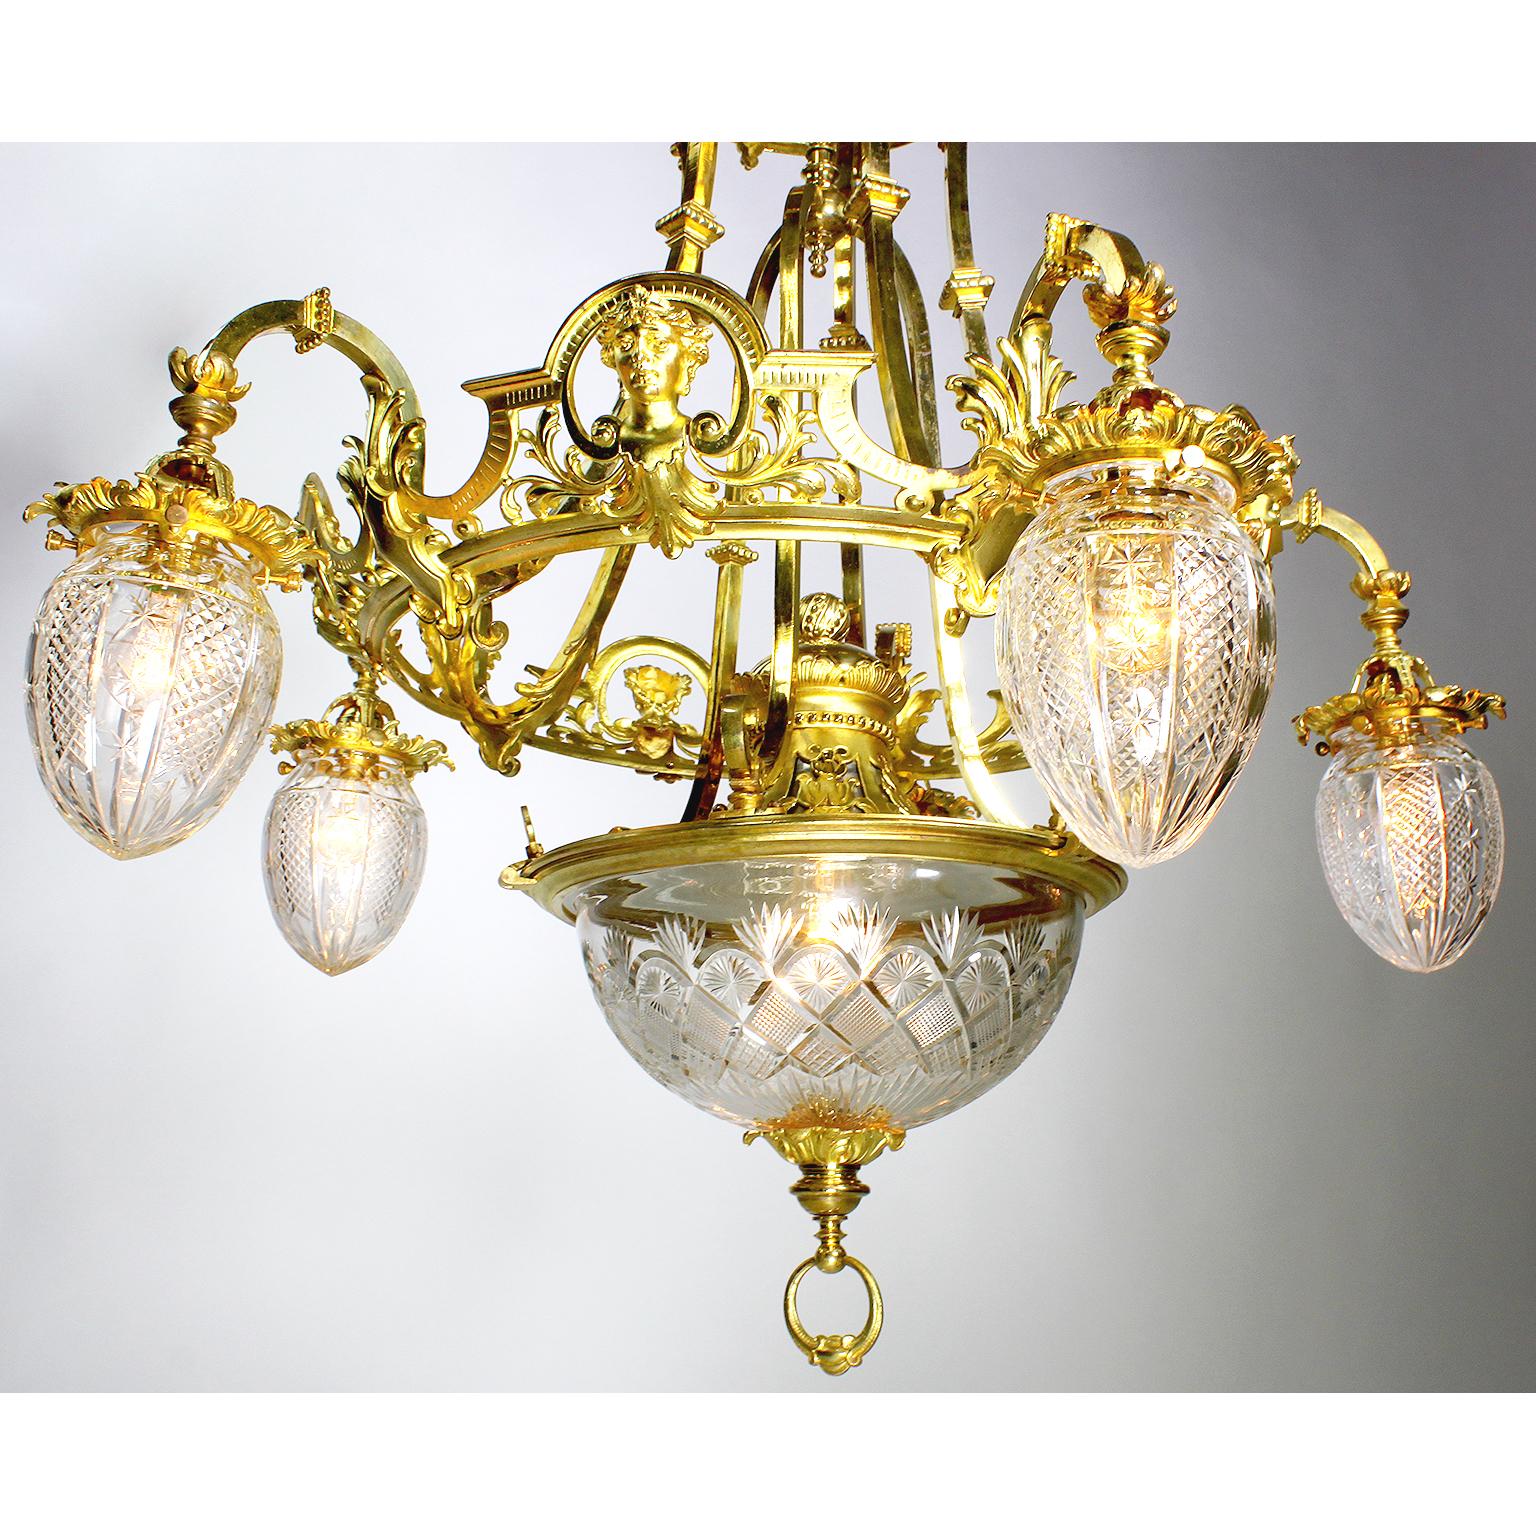 French 19th-20th Century Belle Époque Gilt-Bronze & Cut-Glass 6-Light Chandelier In Good Condition For Sale In Los Angeles, CA